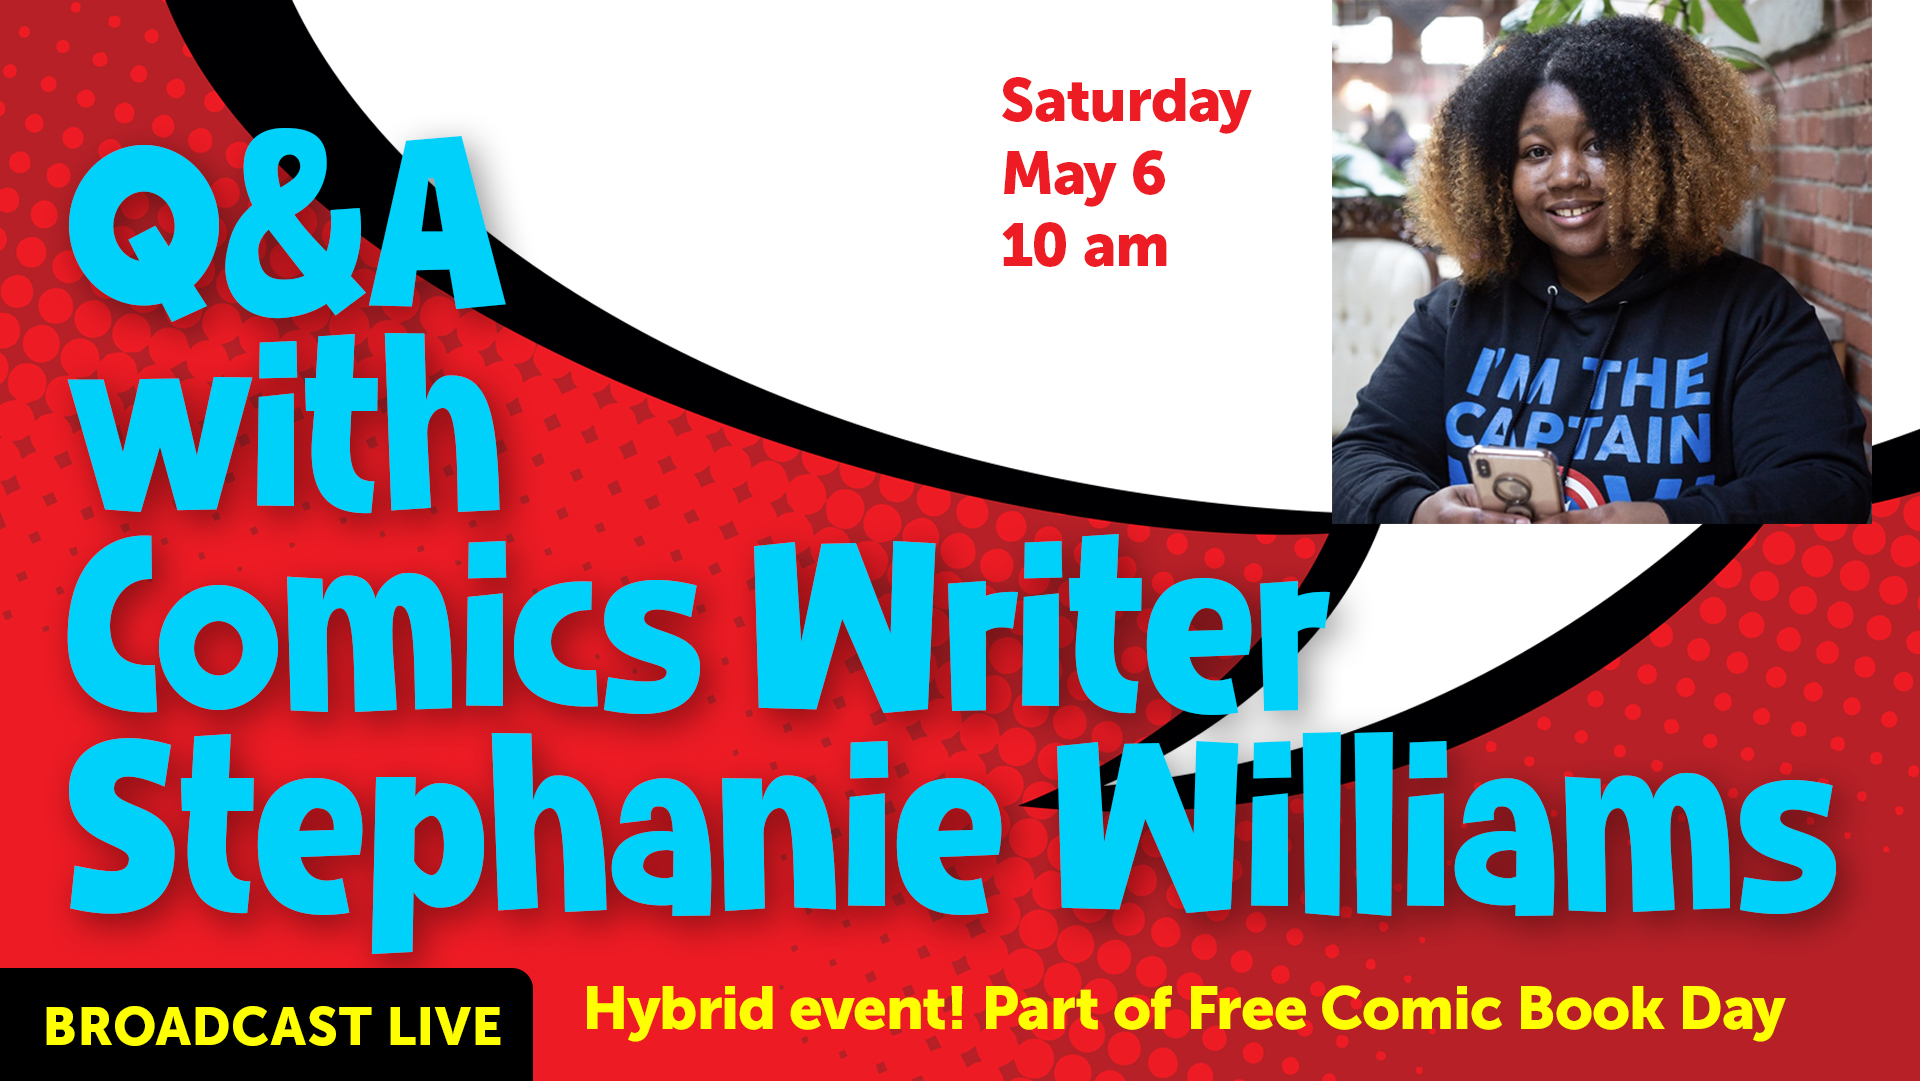 Image for Virtual Visit with Comics Writer Stephanie Williams